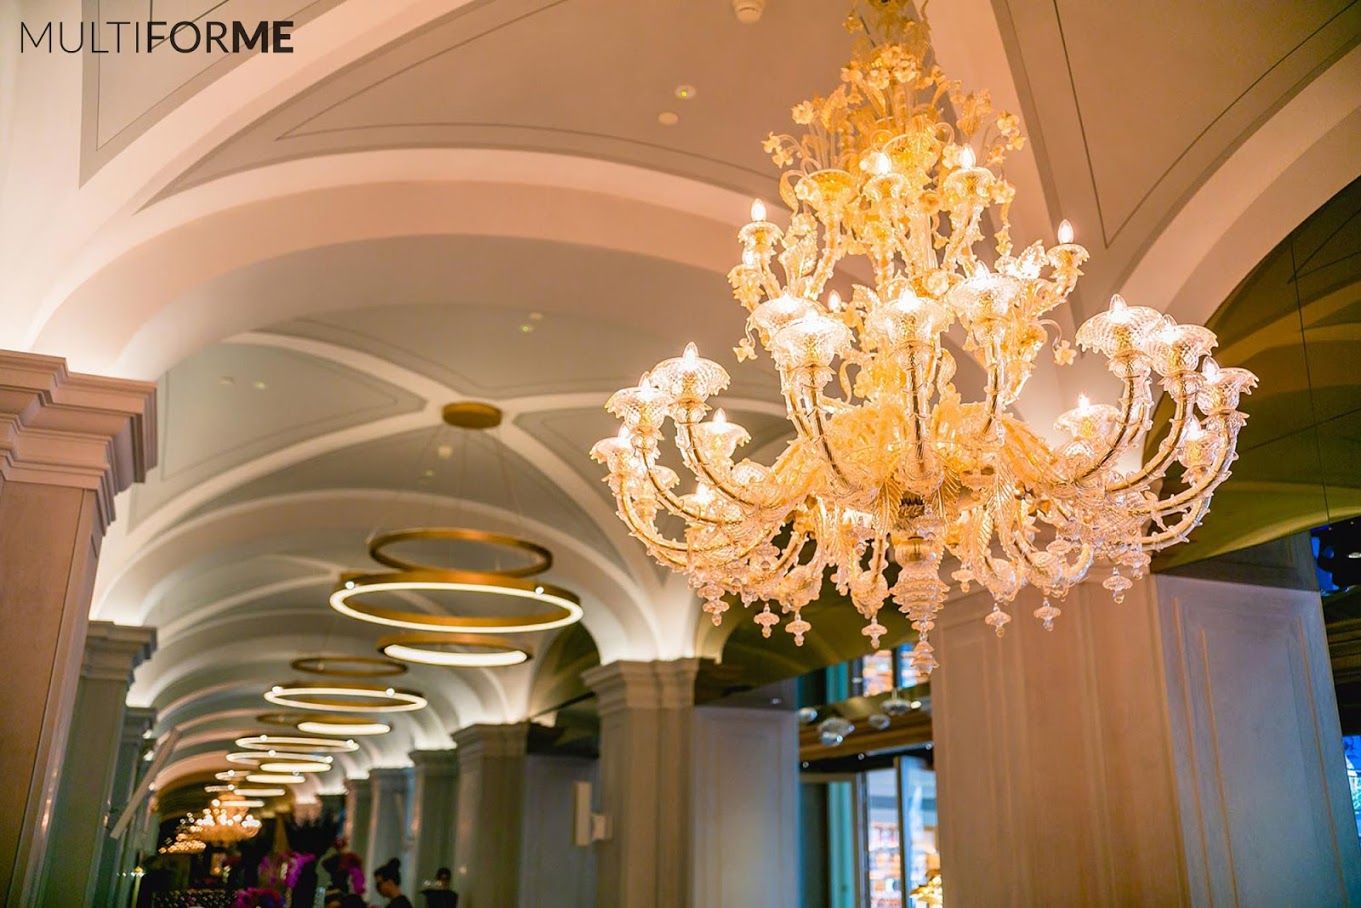 Corridor with chandeliers and vaulted ceiling MULTIFORME® lighting Espaces commerciaux Hôtels